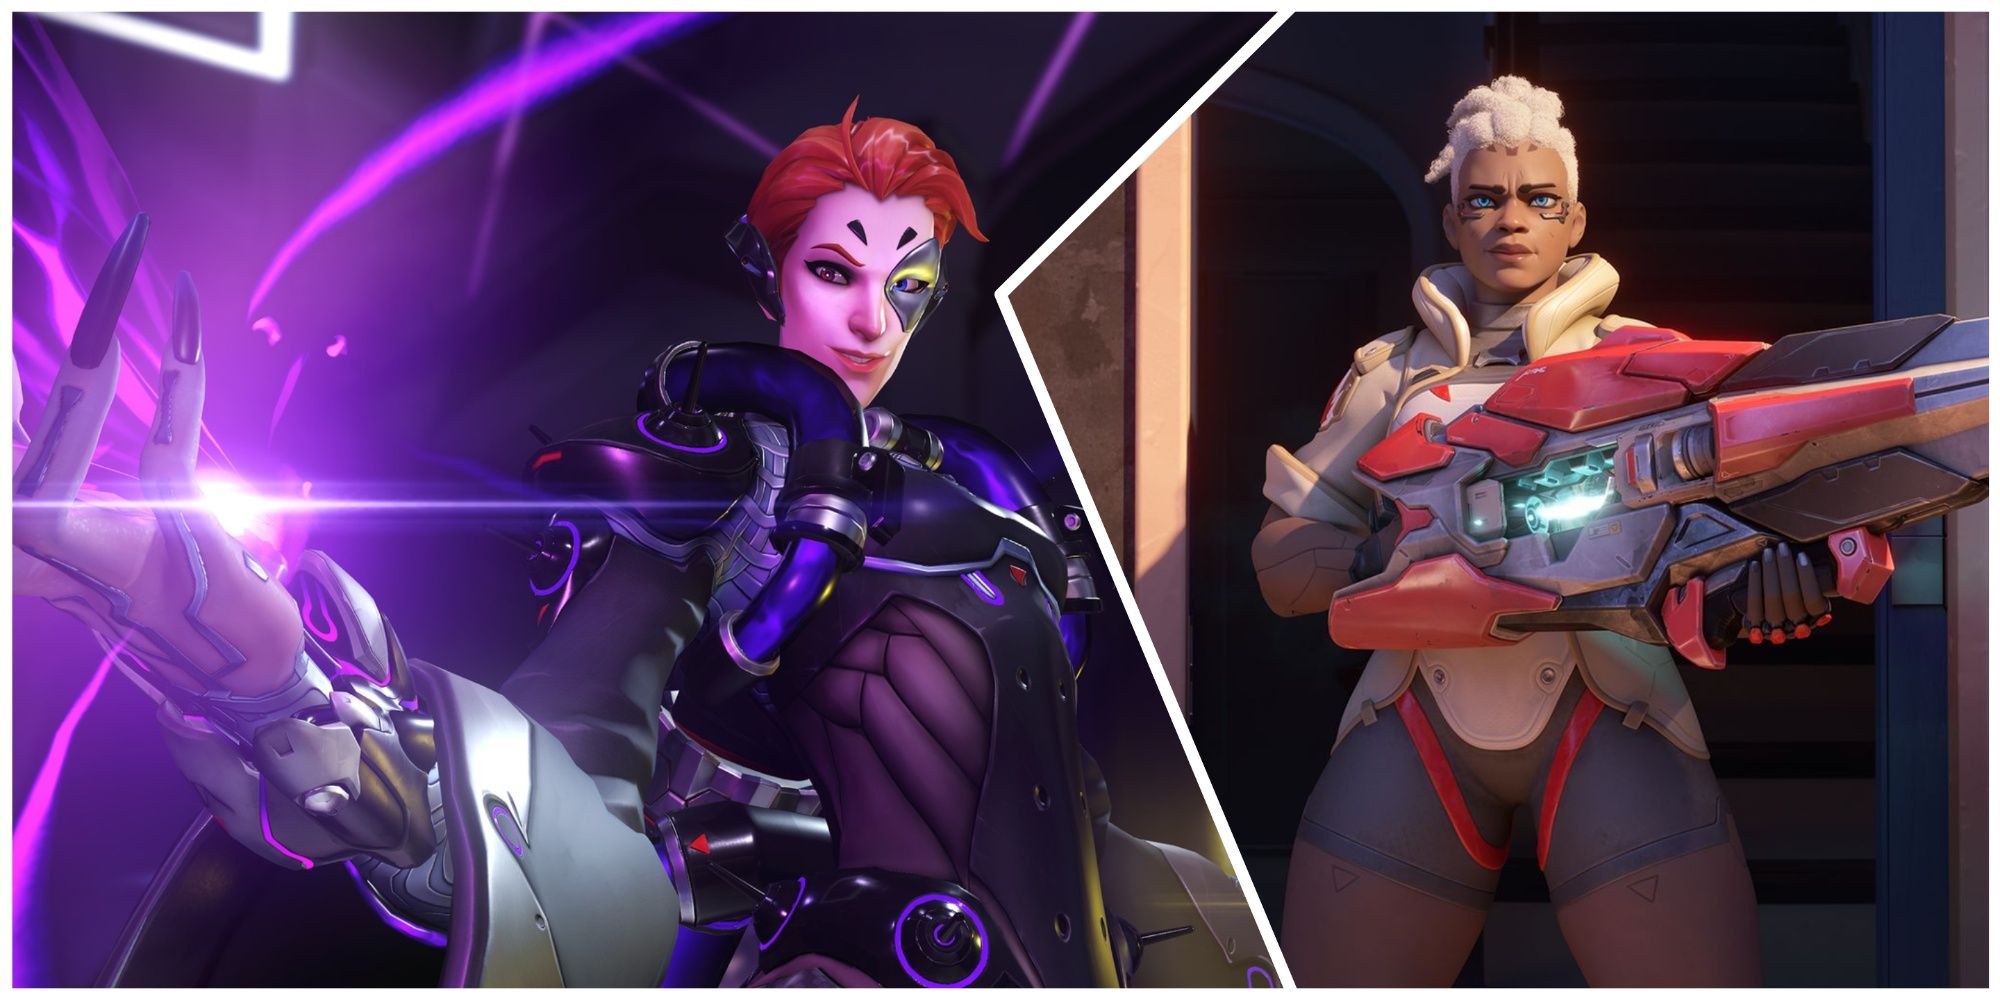 Collage Image of Moira and Sojourn from Overwatch 2